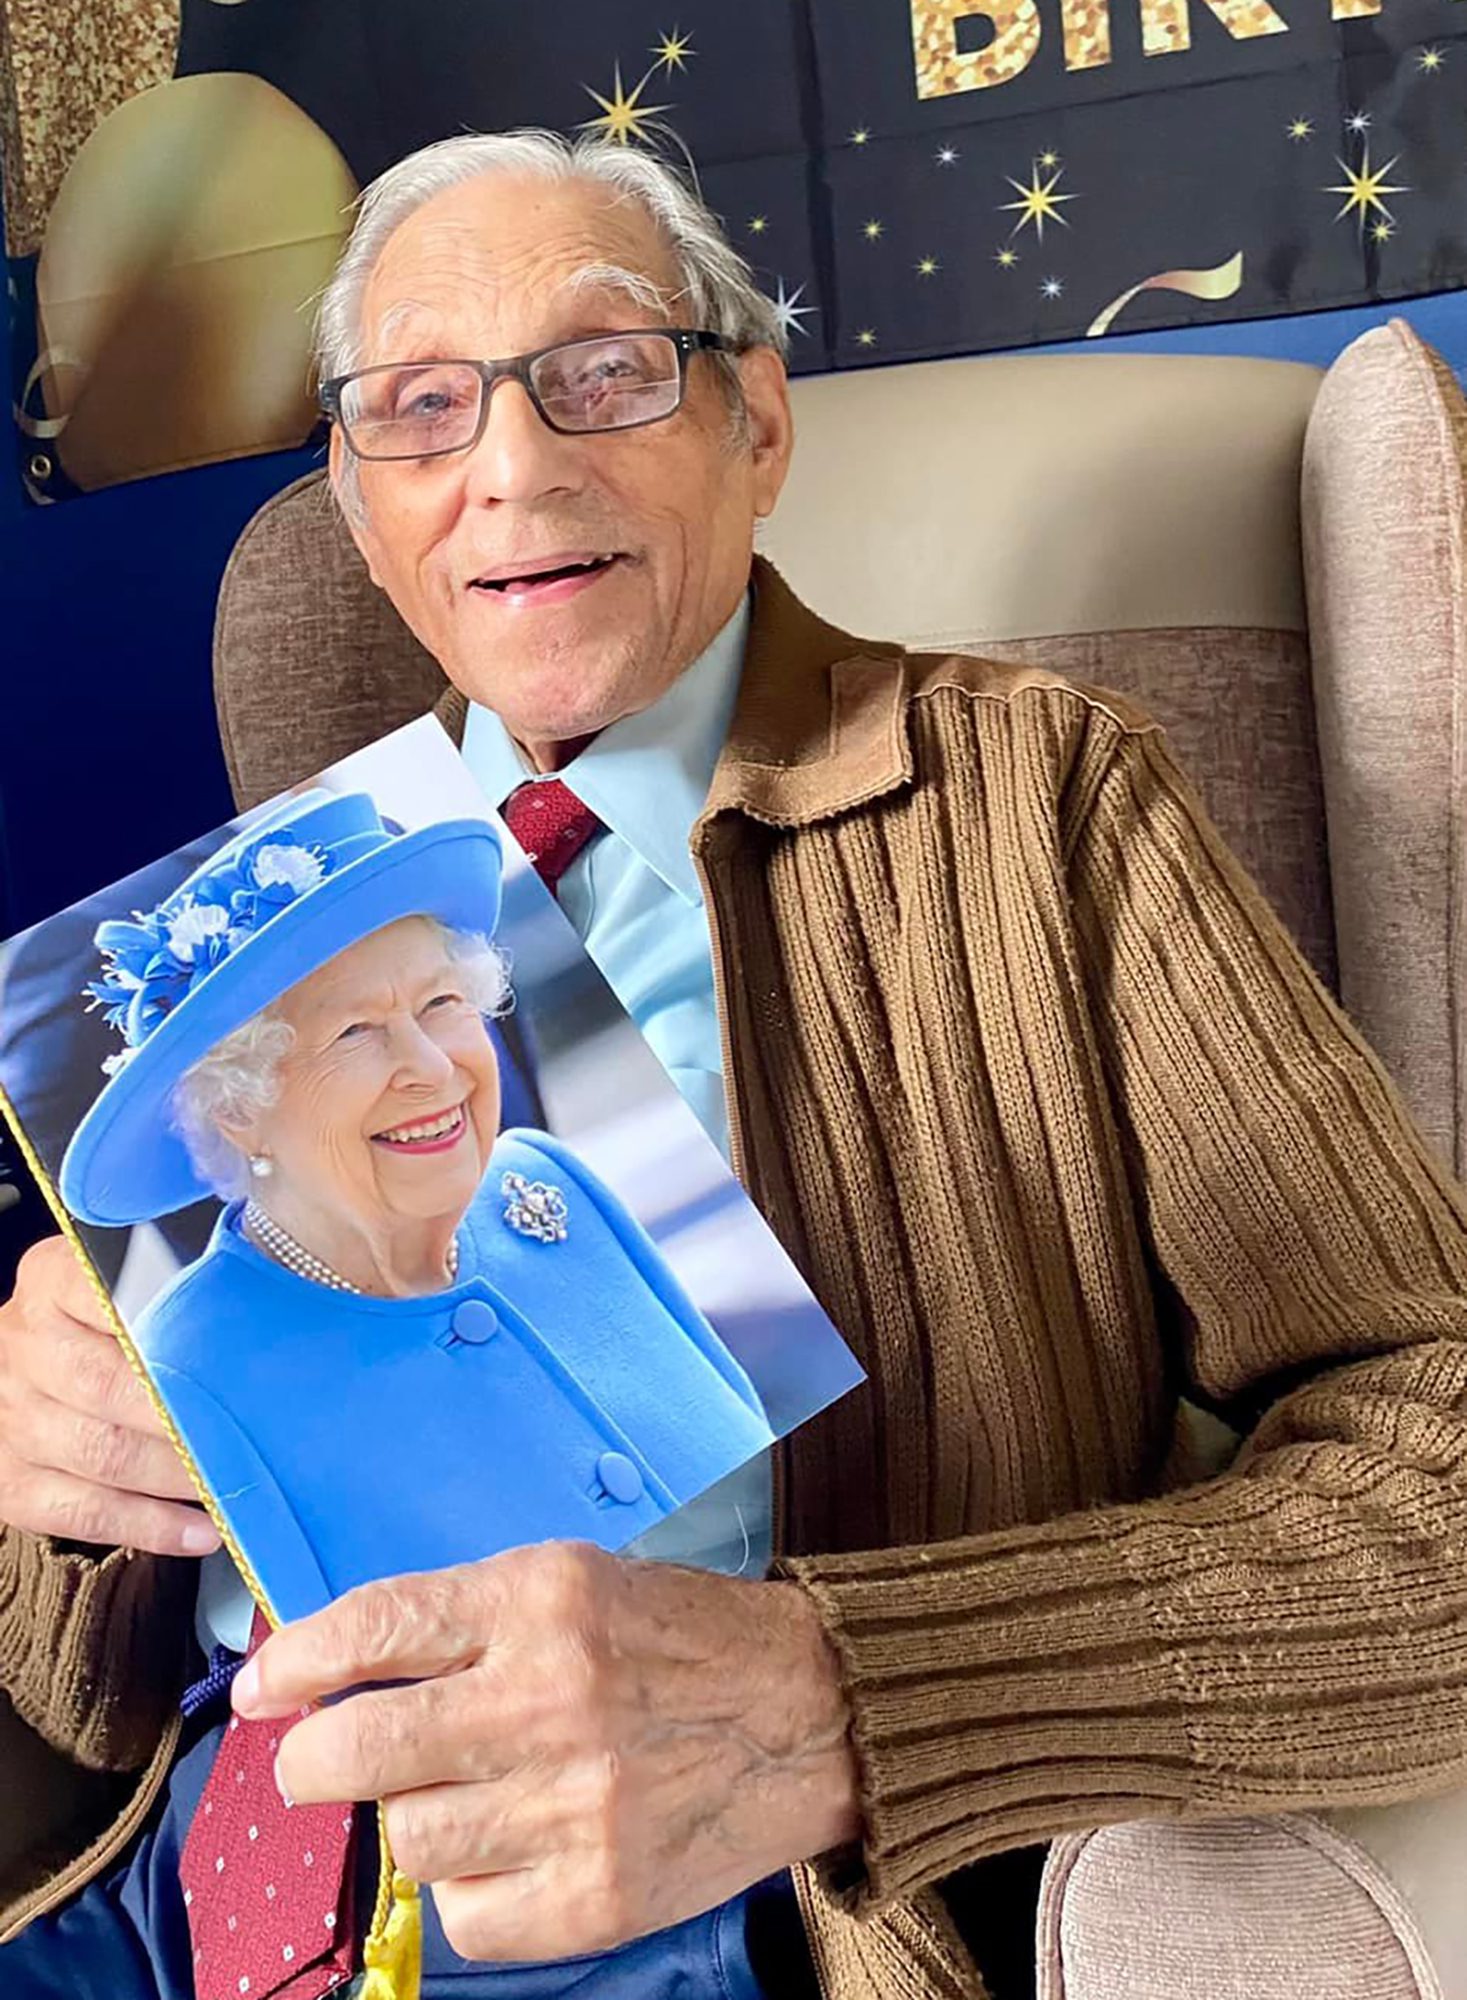 Centenarian Cedric on his birthday holding a card from HM Queen Elizabeth II, before her sad passing.